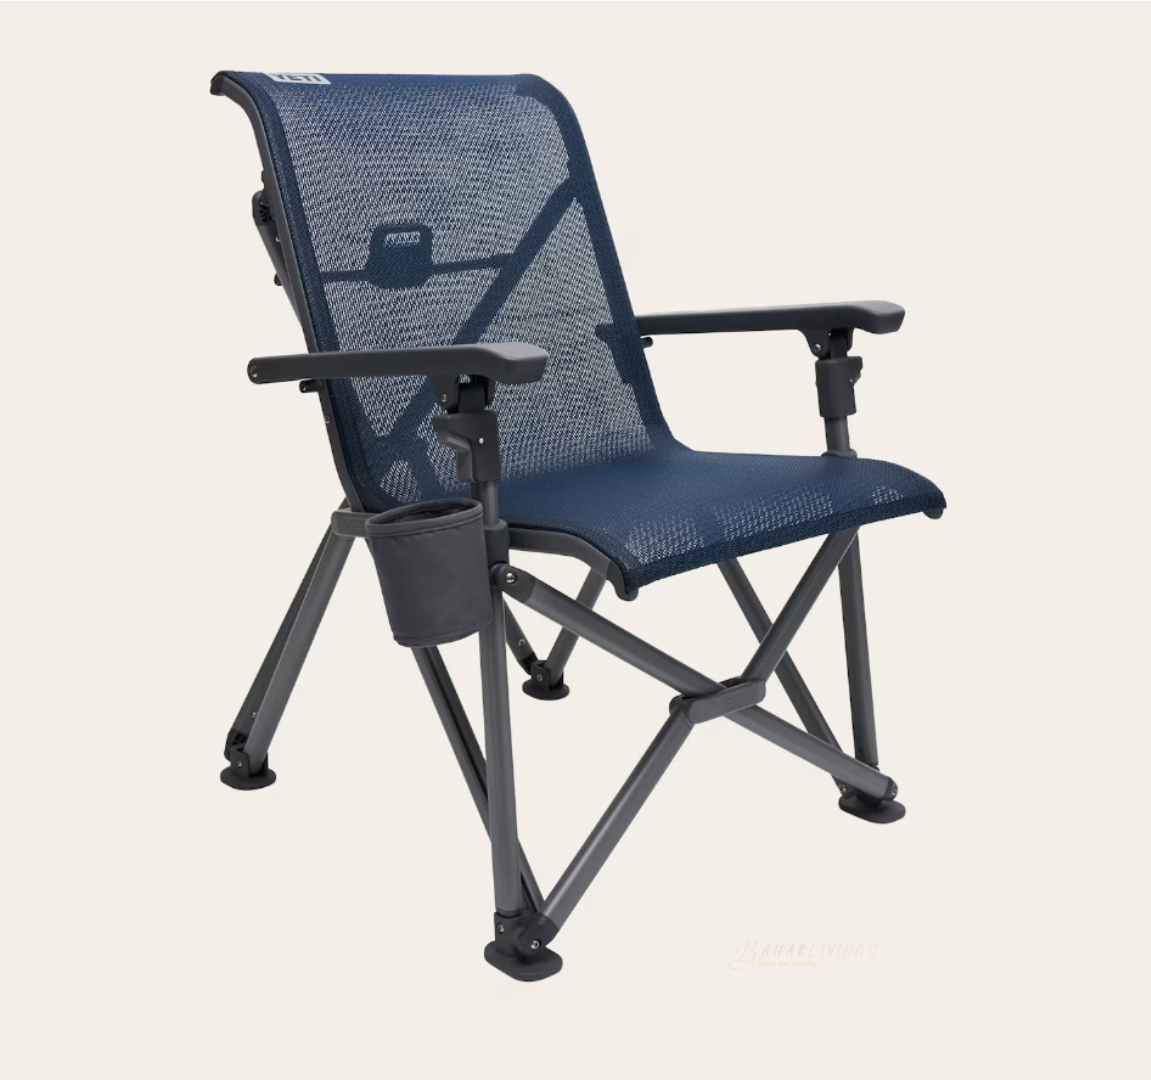 Opulent Oasis: Yeti Trailhead - Luxury Camping Chair Excellence